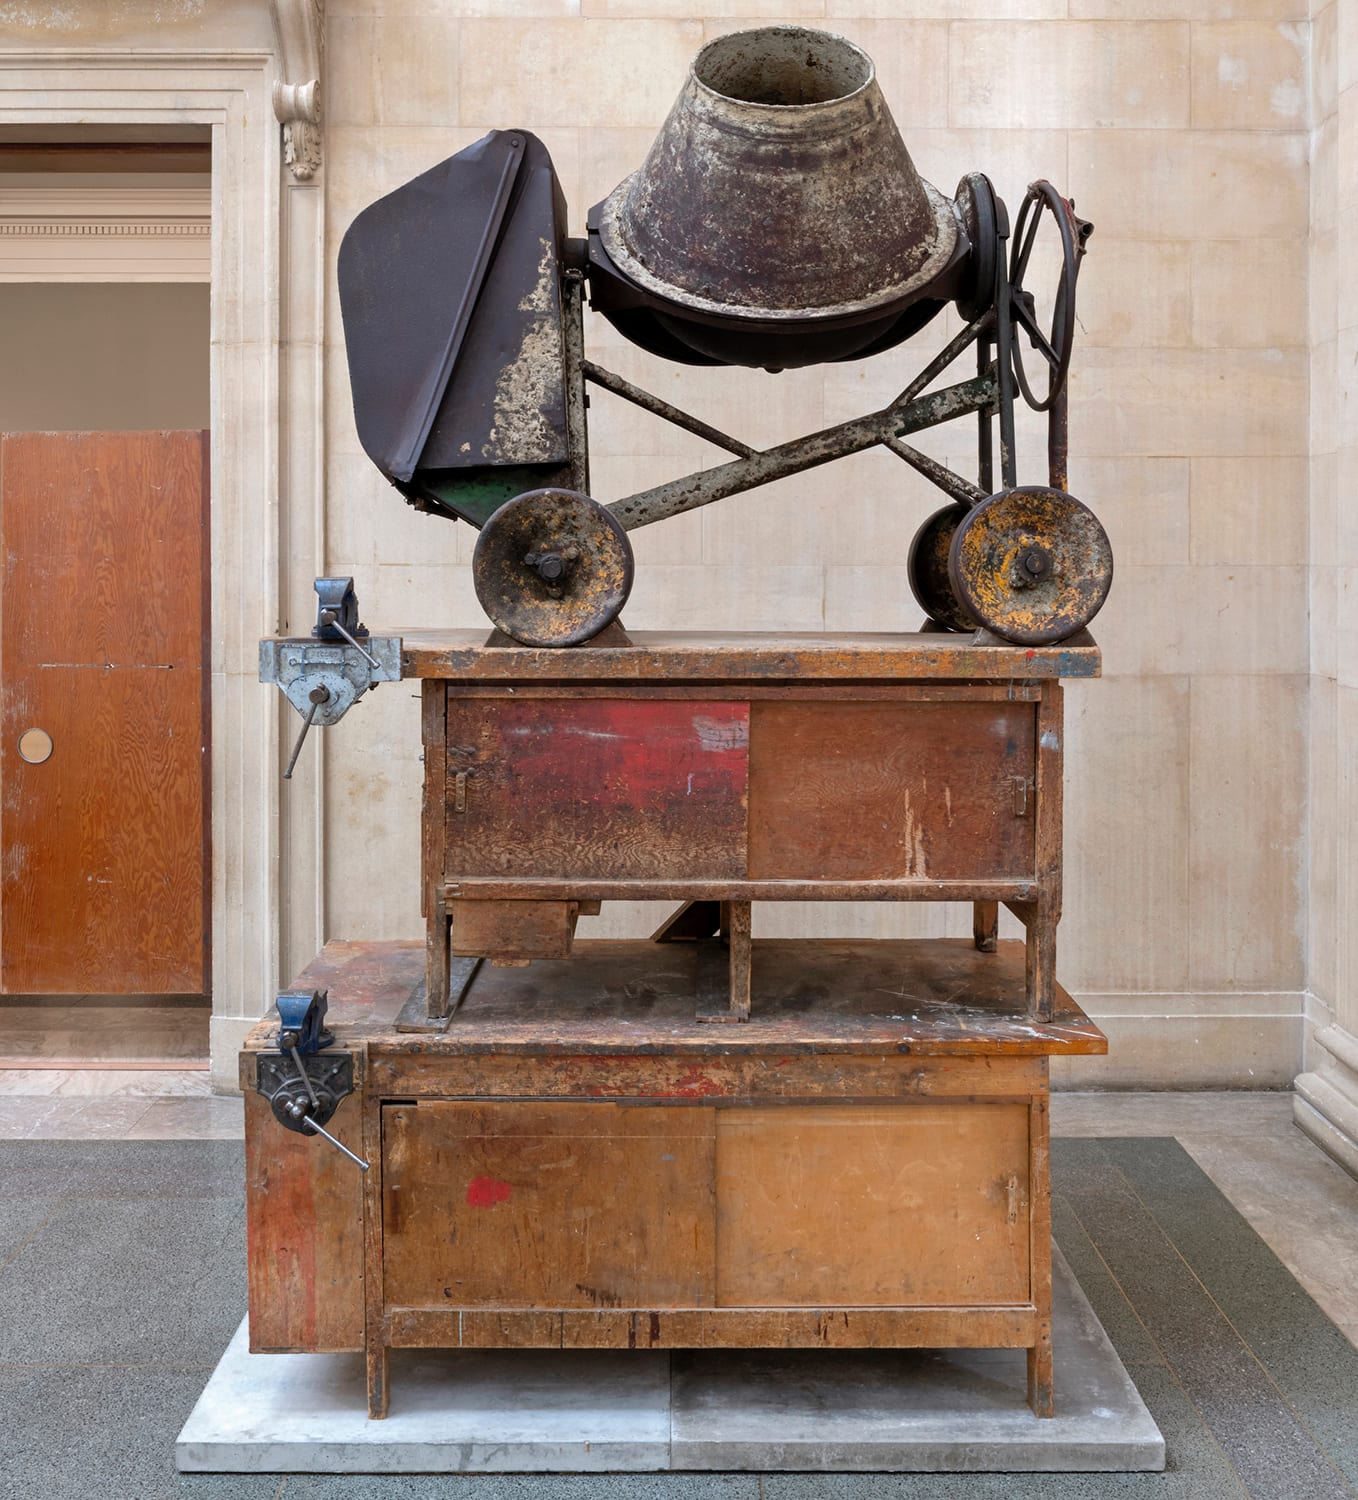 Mike Nelson, The Asset Strippers (War Memorial), 2019. Part of The Asset Strippers, as originally conceived and commissioned for the Tate Britain Commission 2019. Photo by Tate Britain (Matt Greenwood), © Mike Nelson. Courtesy the artist, neugerriemschneider, Berlin and Galleria Franco Noero, Turin.